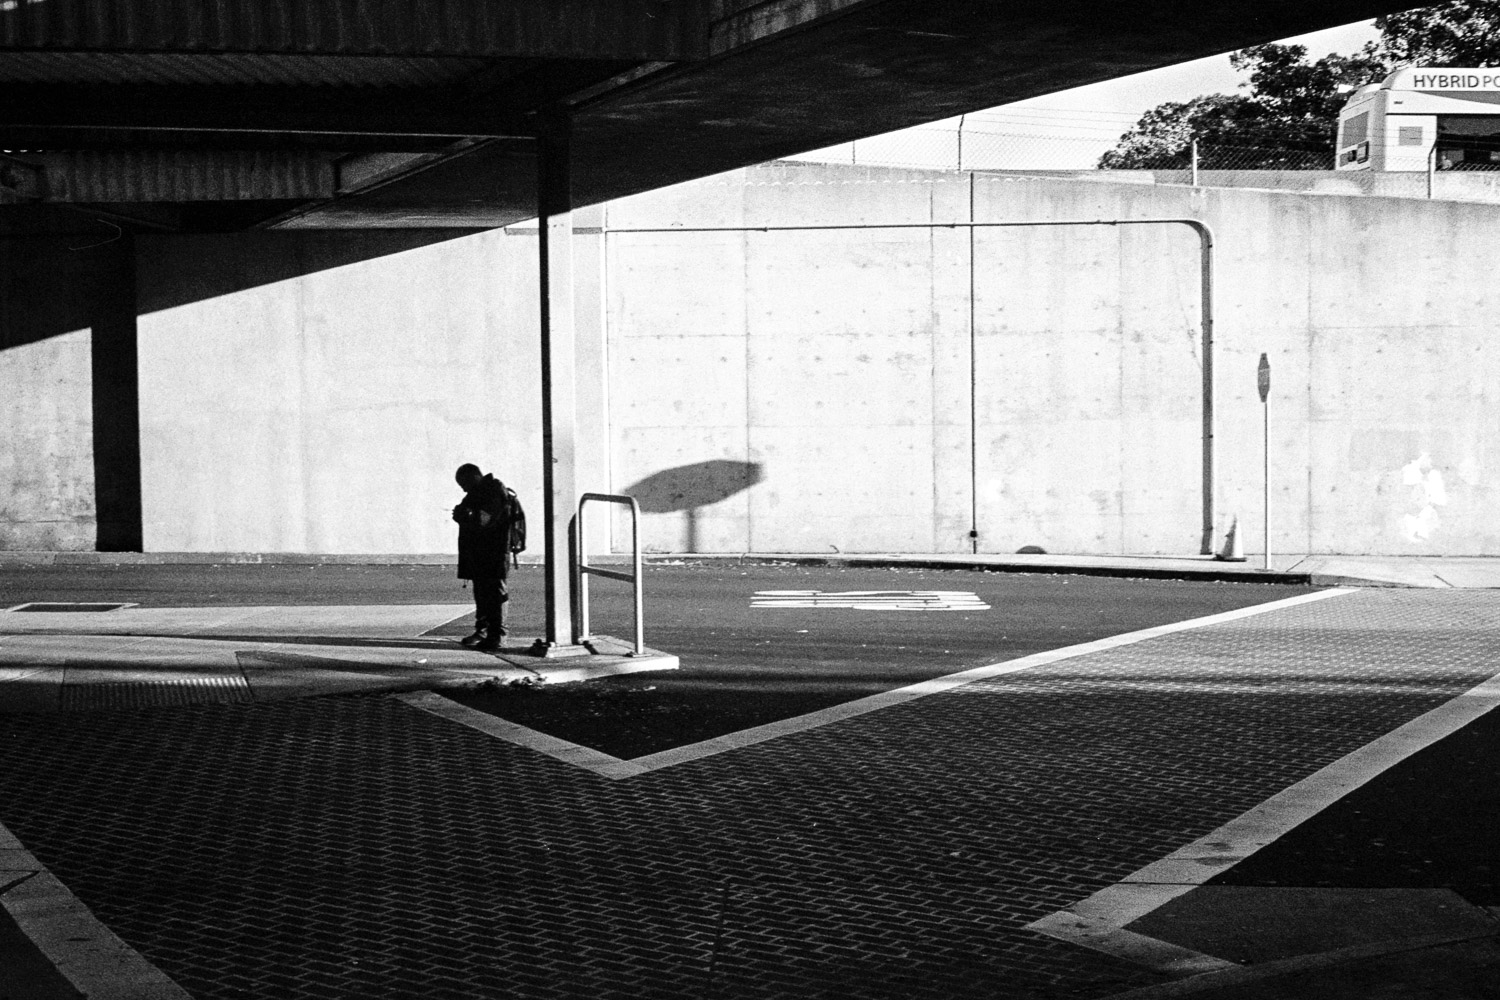 A person waiting at a bus stop